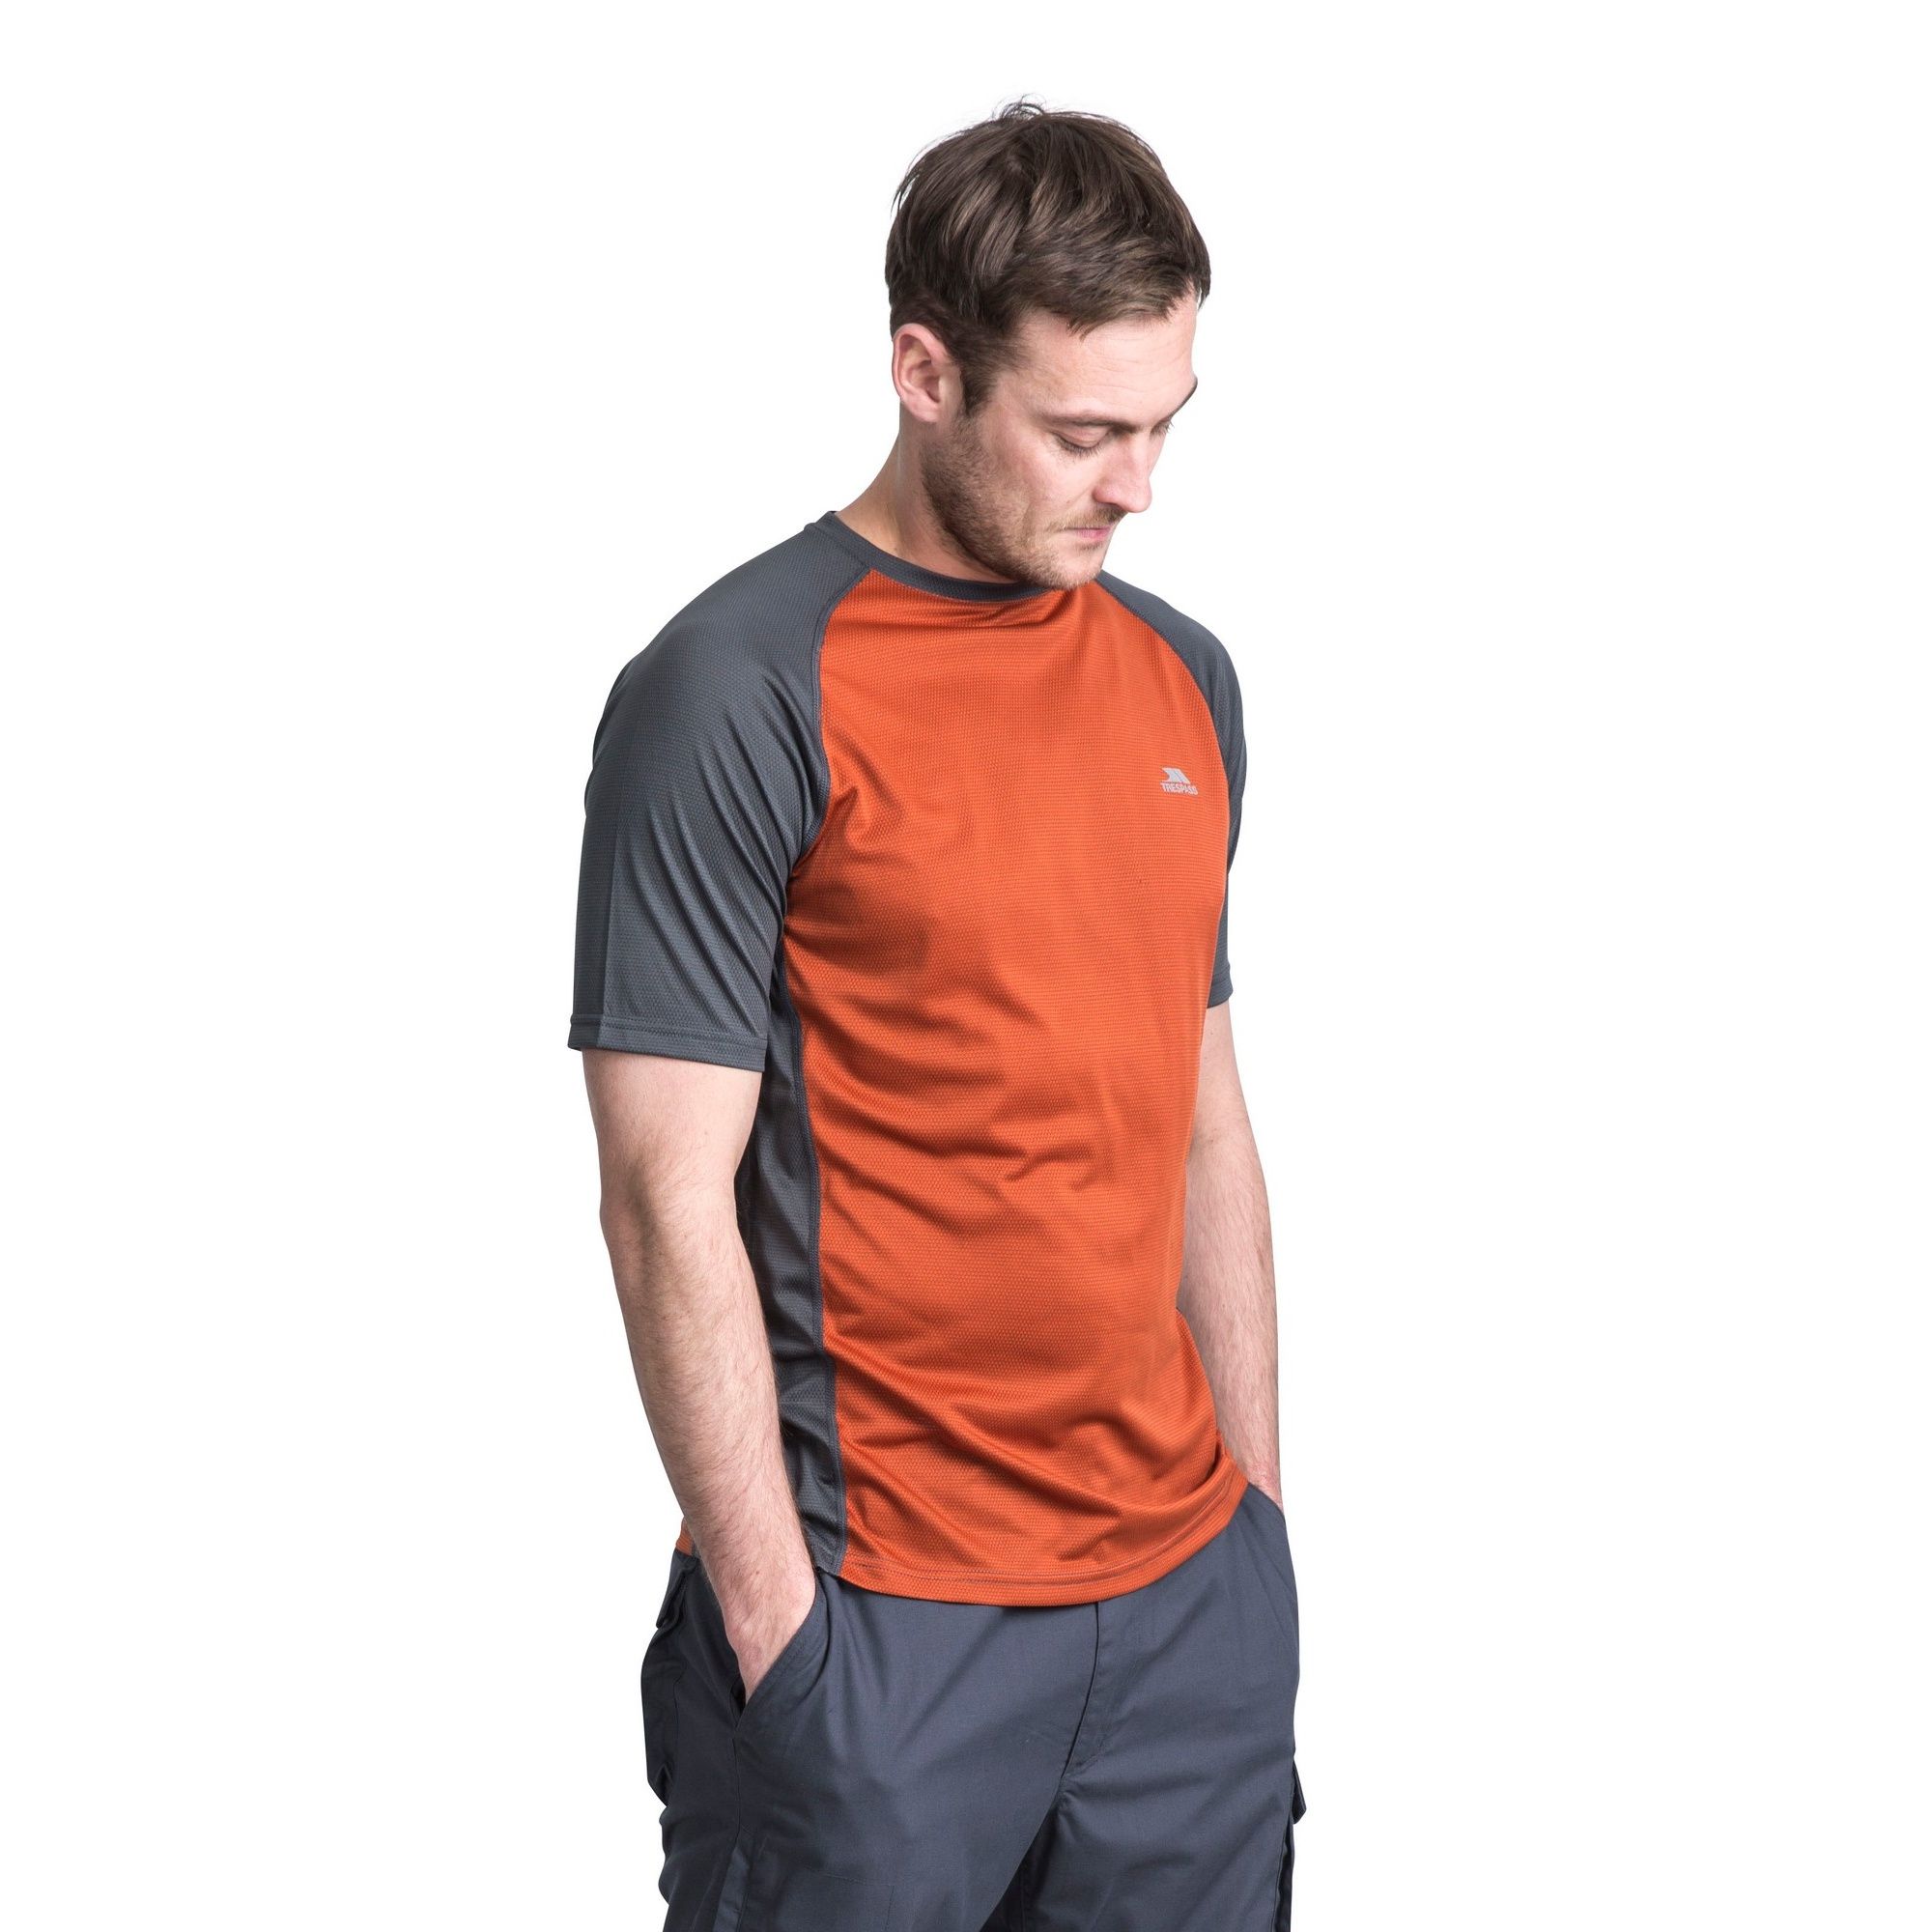 Coverstitch. Contrast binding at inner back neck. Contrast side panels. Quick dry. 75% Polyester, 25% Bamboo. 90gsm. Trespass Mens Chest Sizing (approx): S - 35-37in/89-94cm, M - 38-40in/96.5-101.5cm, L - 41-43in/104-109cm, XL - 44-46in/111.5-117cm, XXL - 46-48in/117-122cm, 3XL - 48-50in/122-127cm.